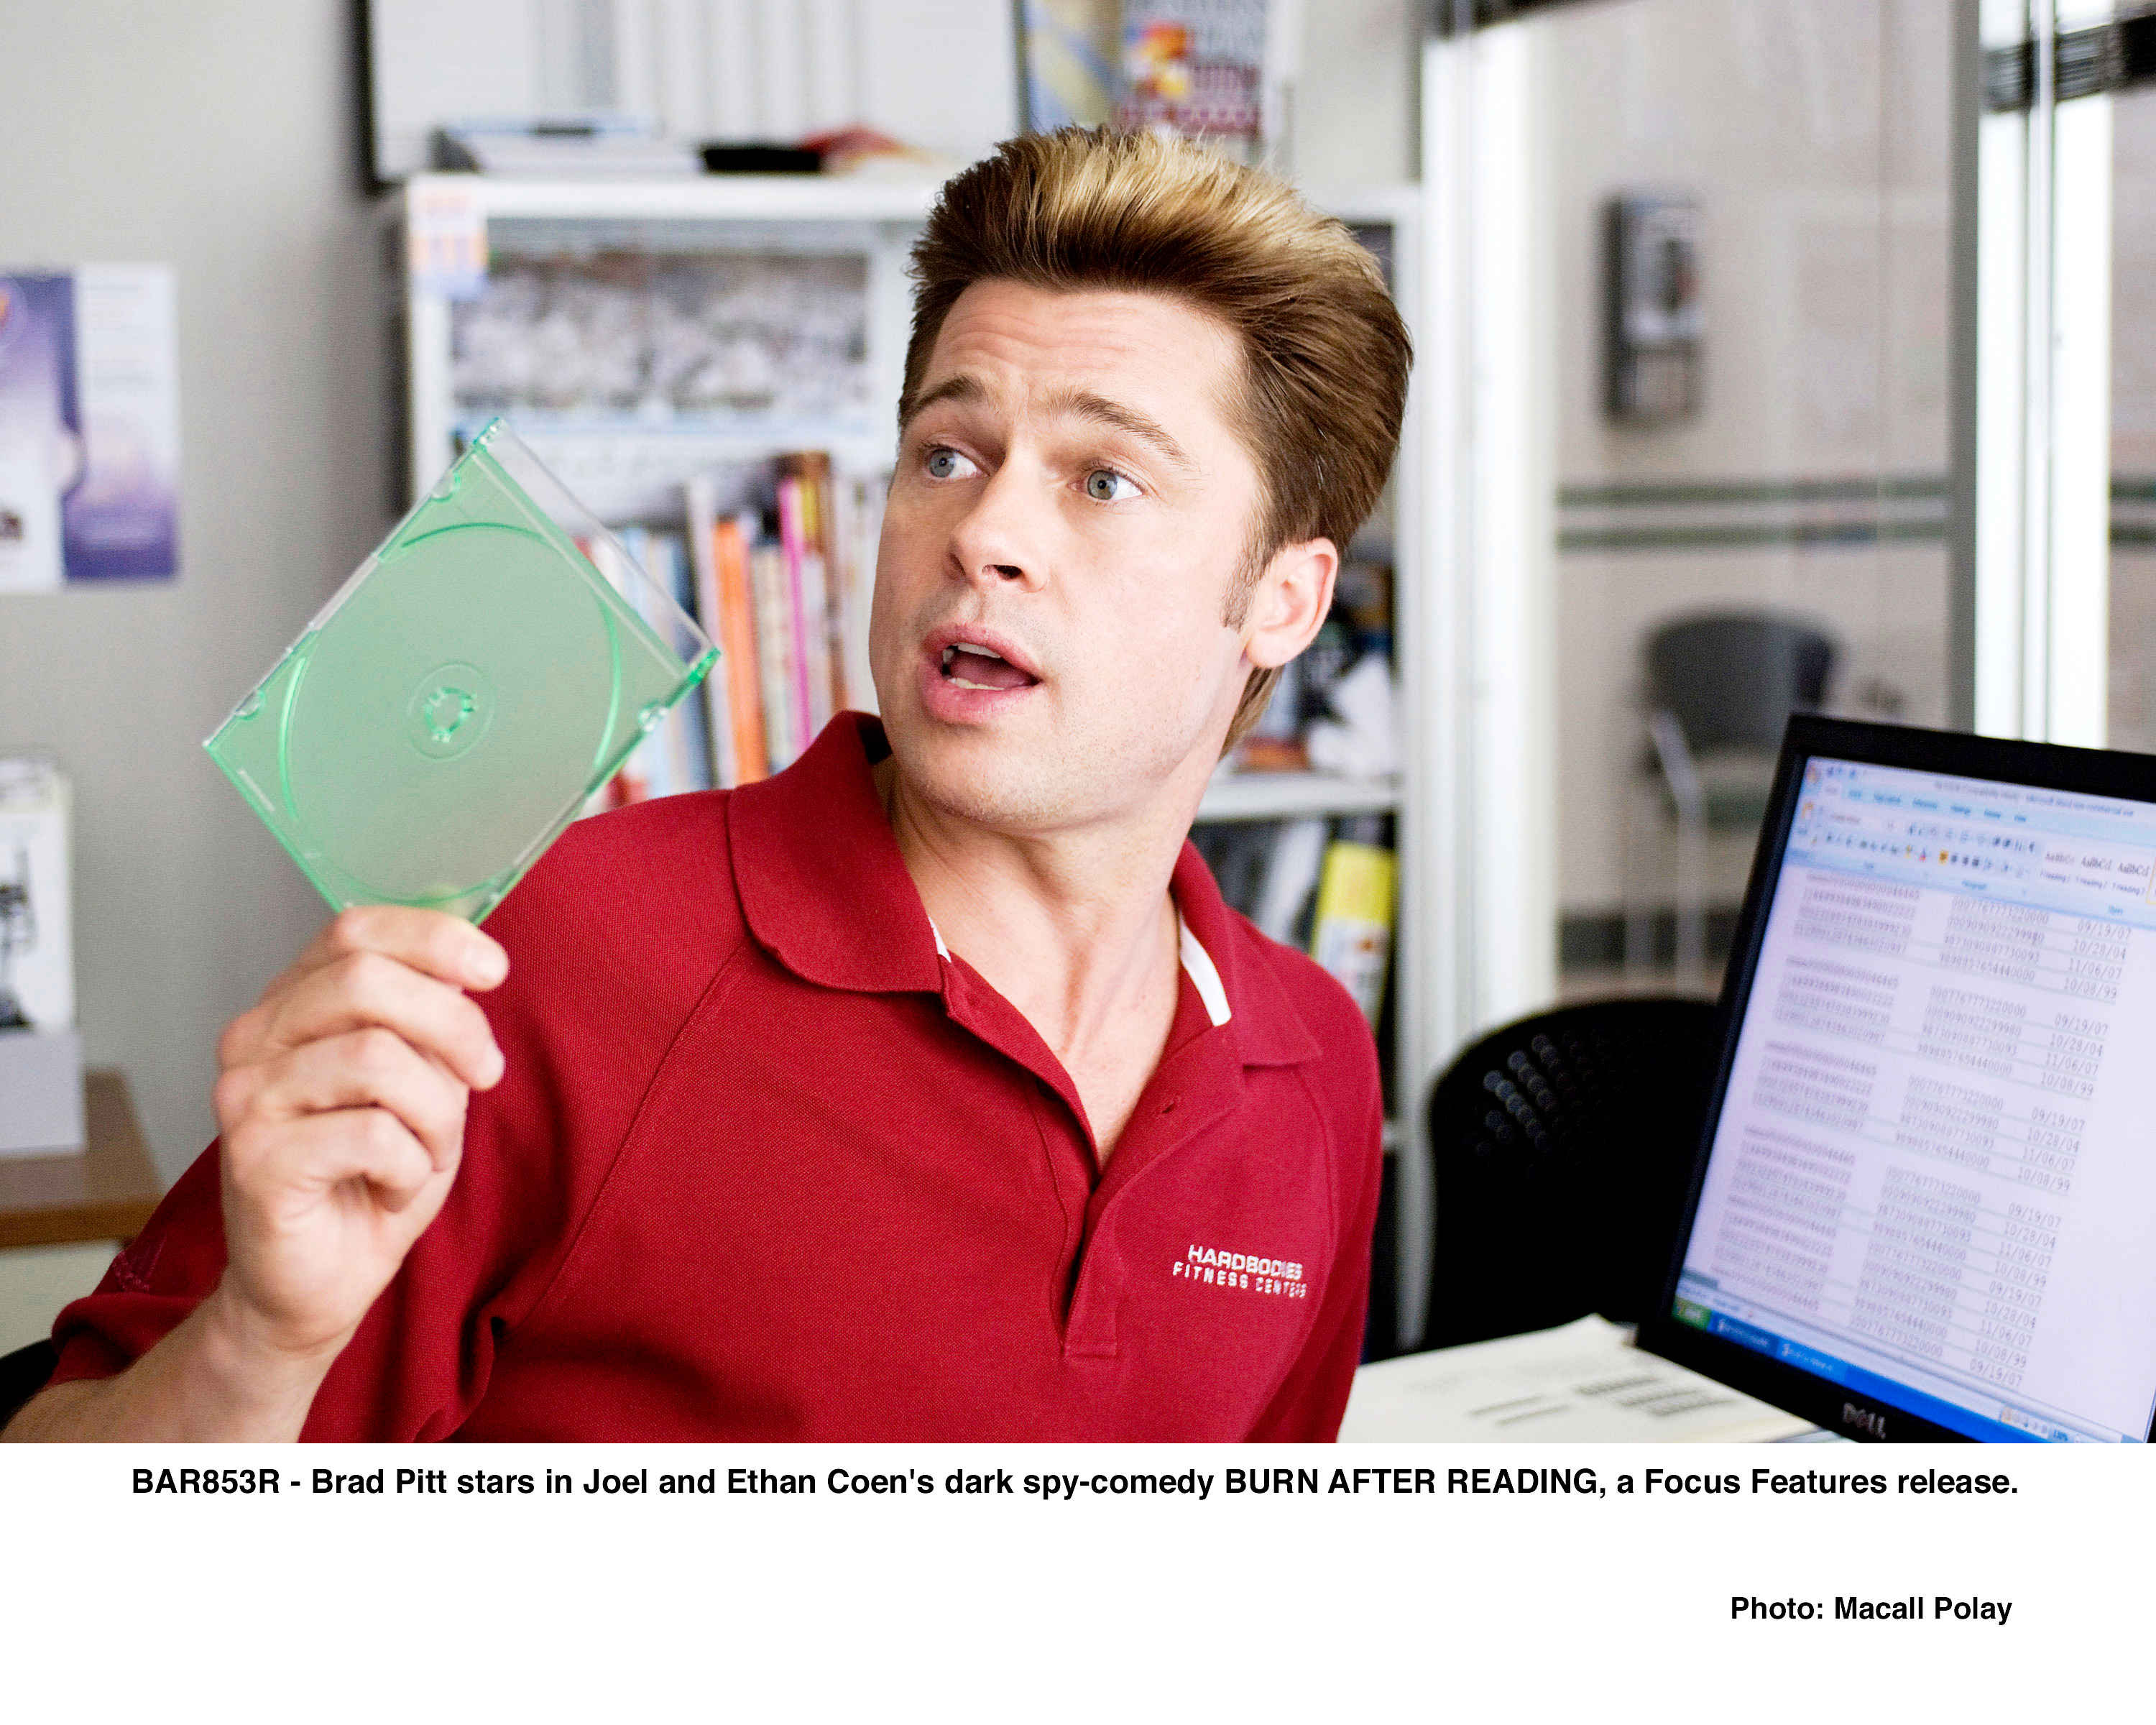 Brad Pitt stars as Chad Feldheimer in Focus Features' Burn After Reading (2008). Photo credit by Macall Polay.